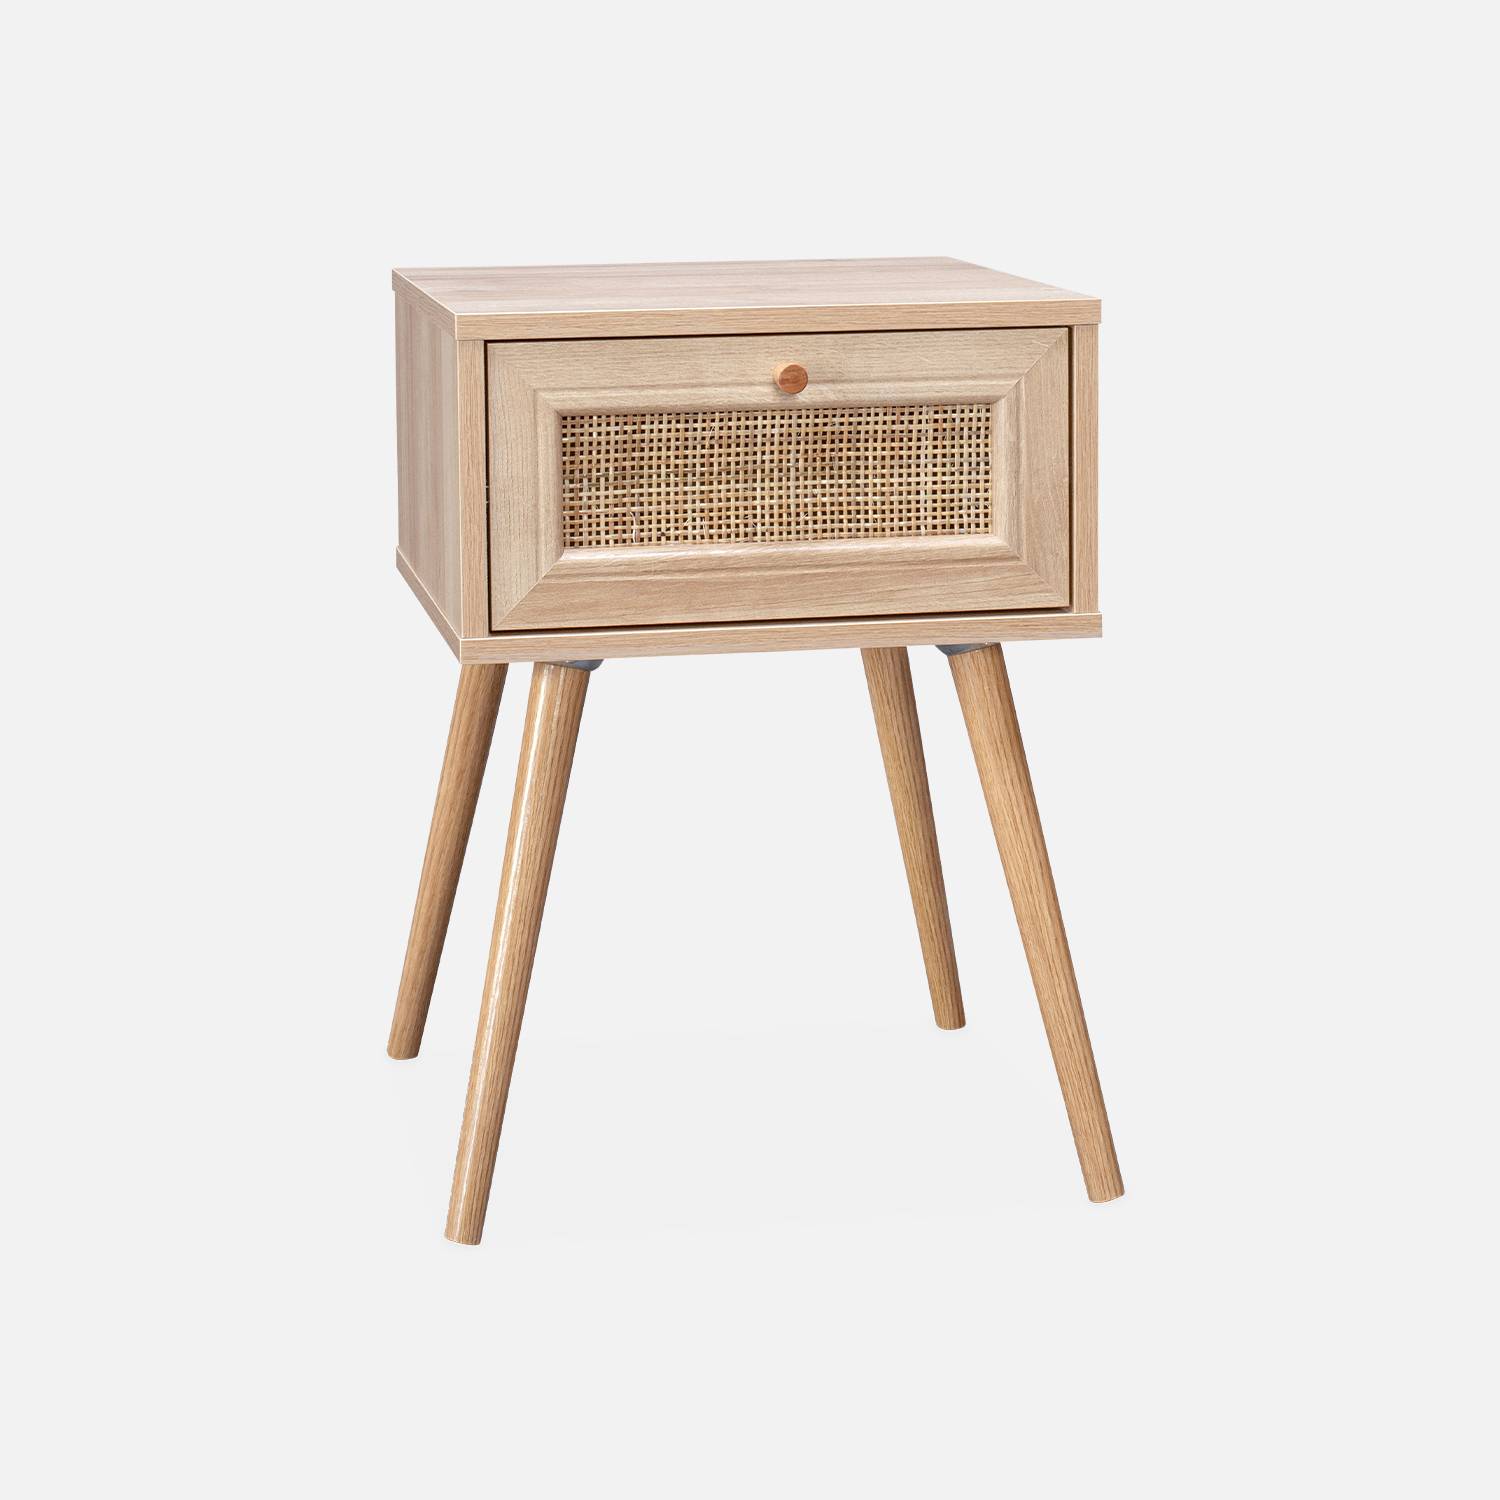 Woven rattan bedside table with drawer 39x39x55.4cm, Natural Wood colour | sweeek